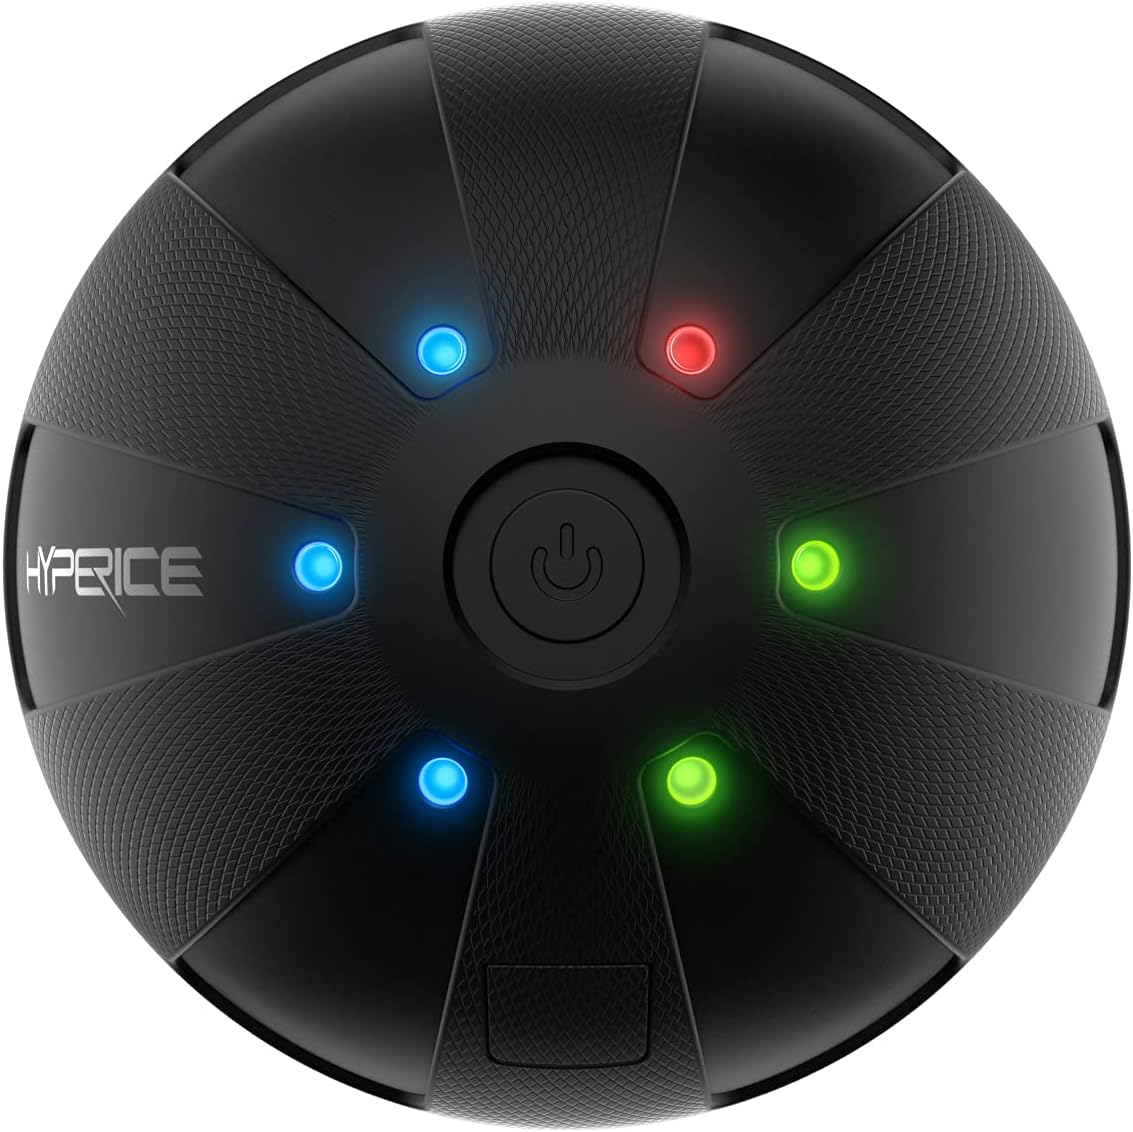 Hyperice Hypersphere | Gadgets to Relieve Sore Muscles